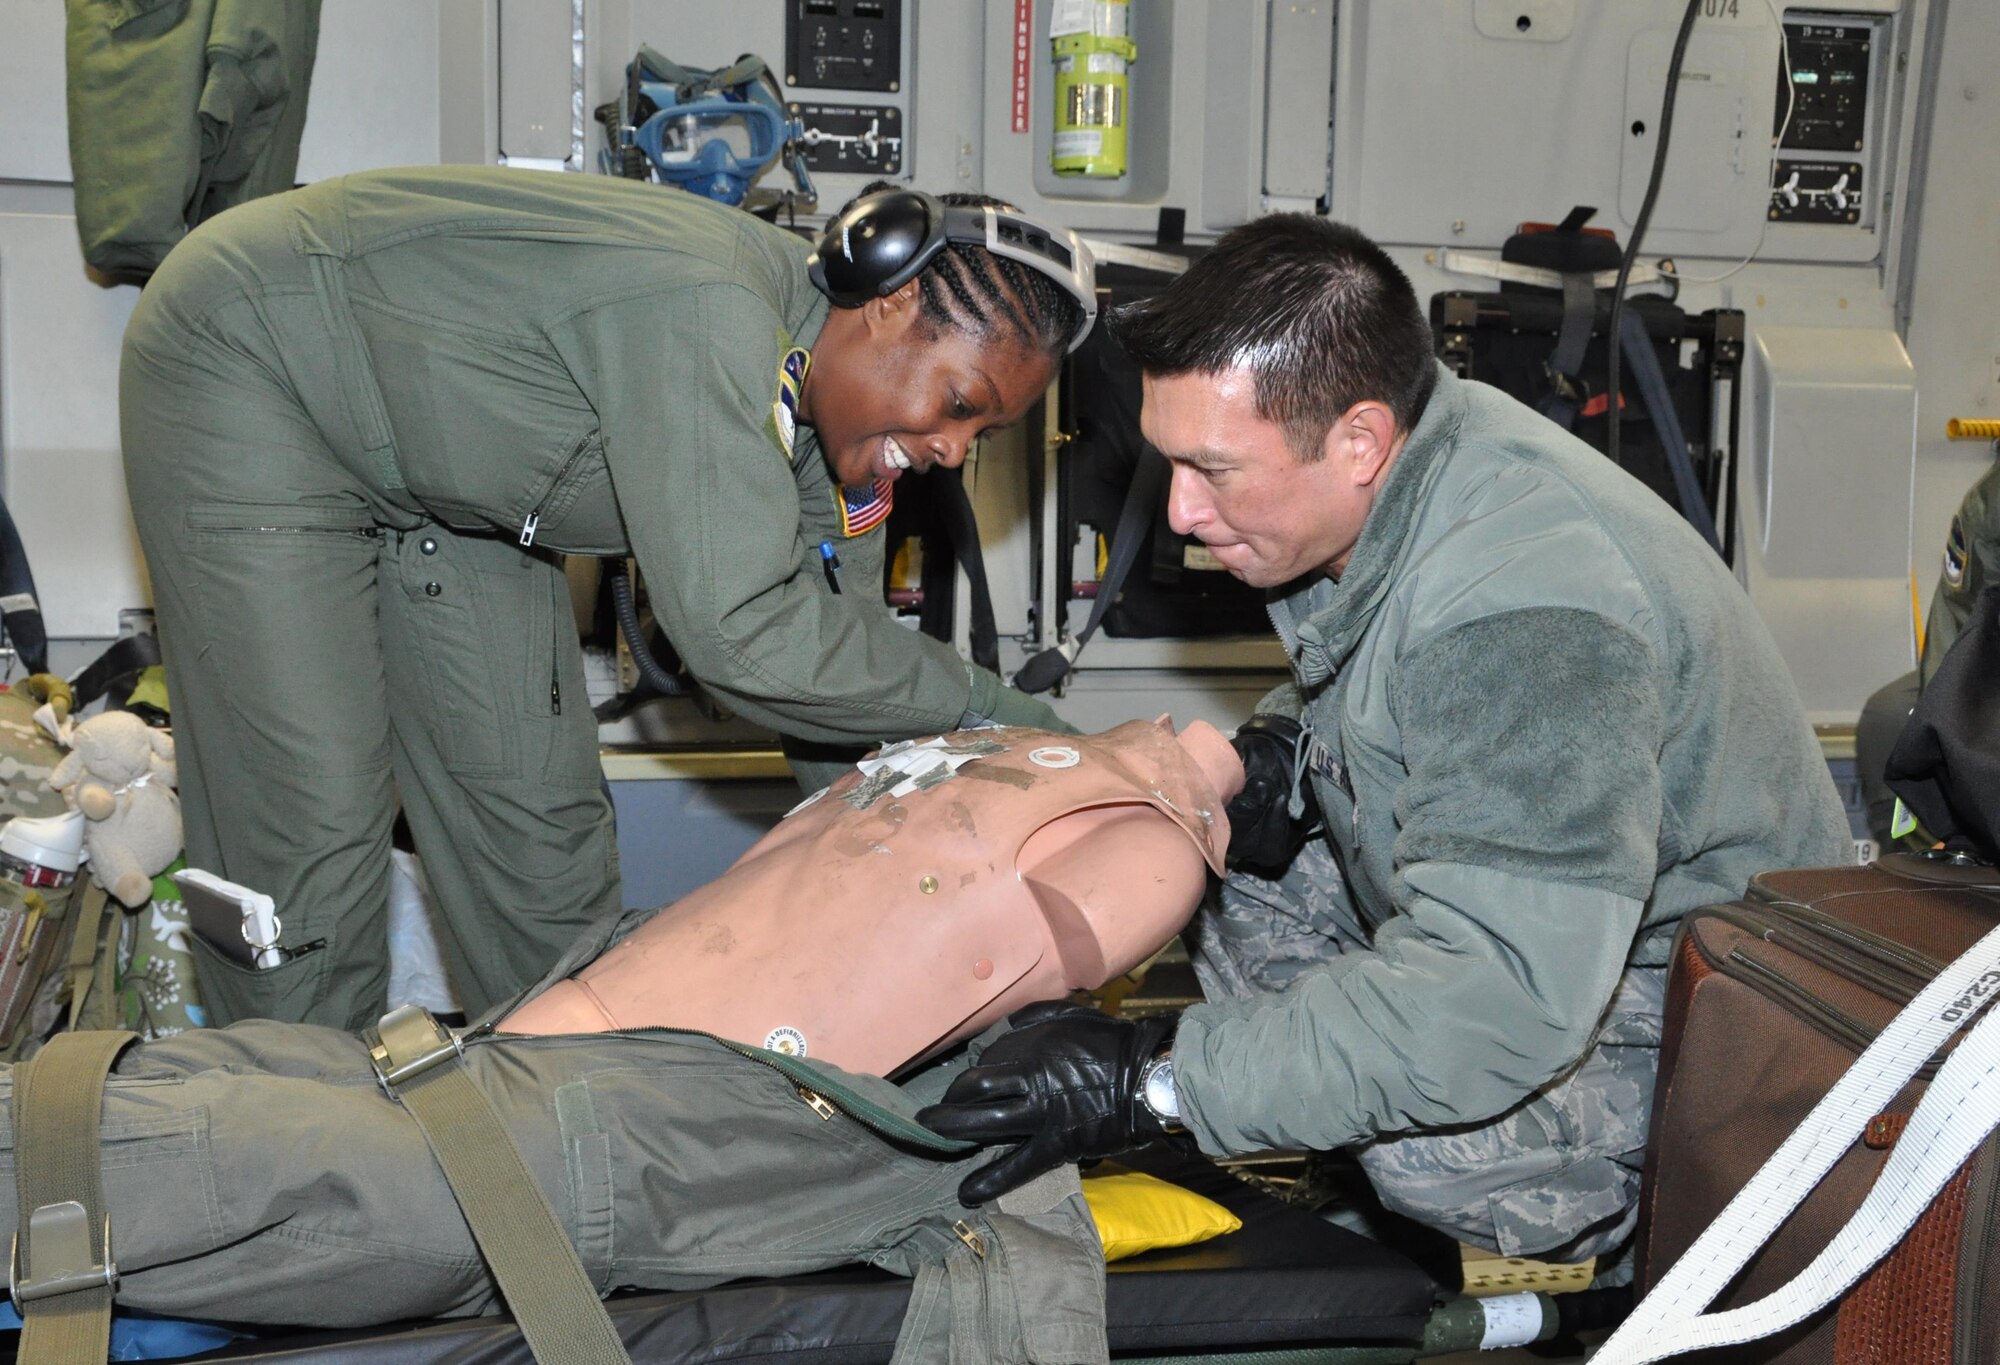 Ministry of presence - Chaplain (Lt Col.) Ronald Apollo (right), 315th Airlift Wing, assists Master Sgt. Latonya Brown, a 315th Aeromedical Evacuation technician, on a recent training mission to Ramstein AB, Germany. (U.S. Air Force Photo by Maj. Wayne Capps)